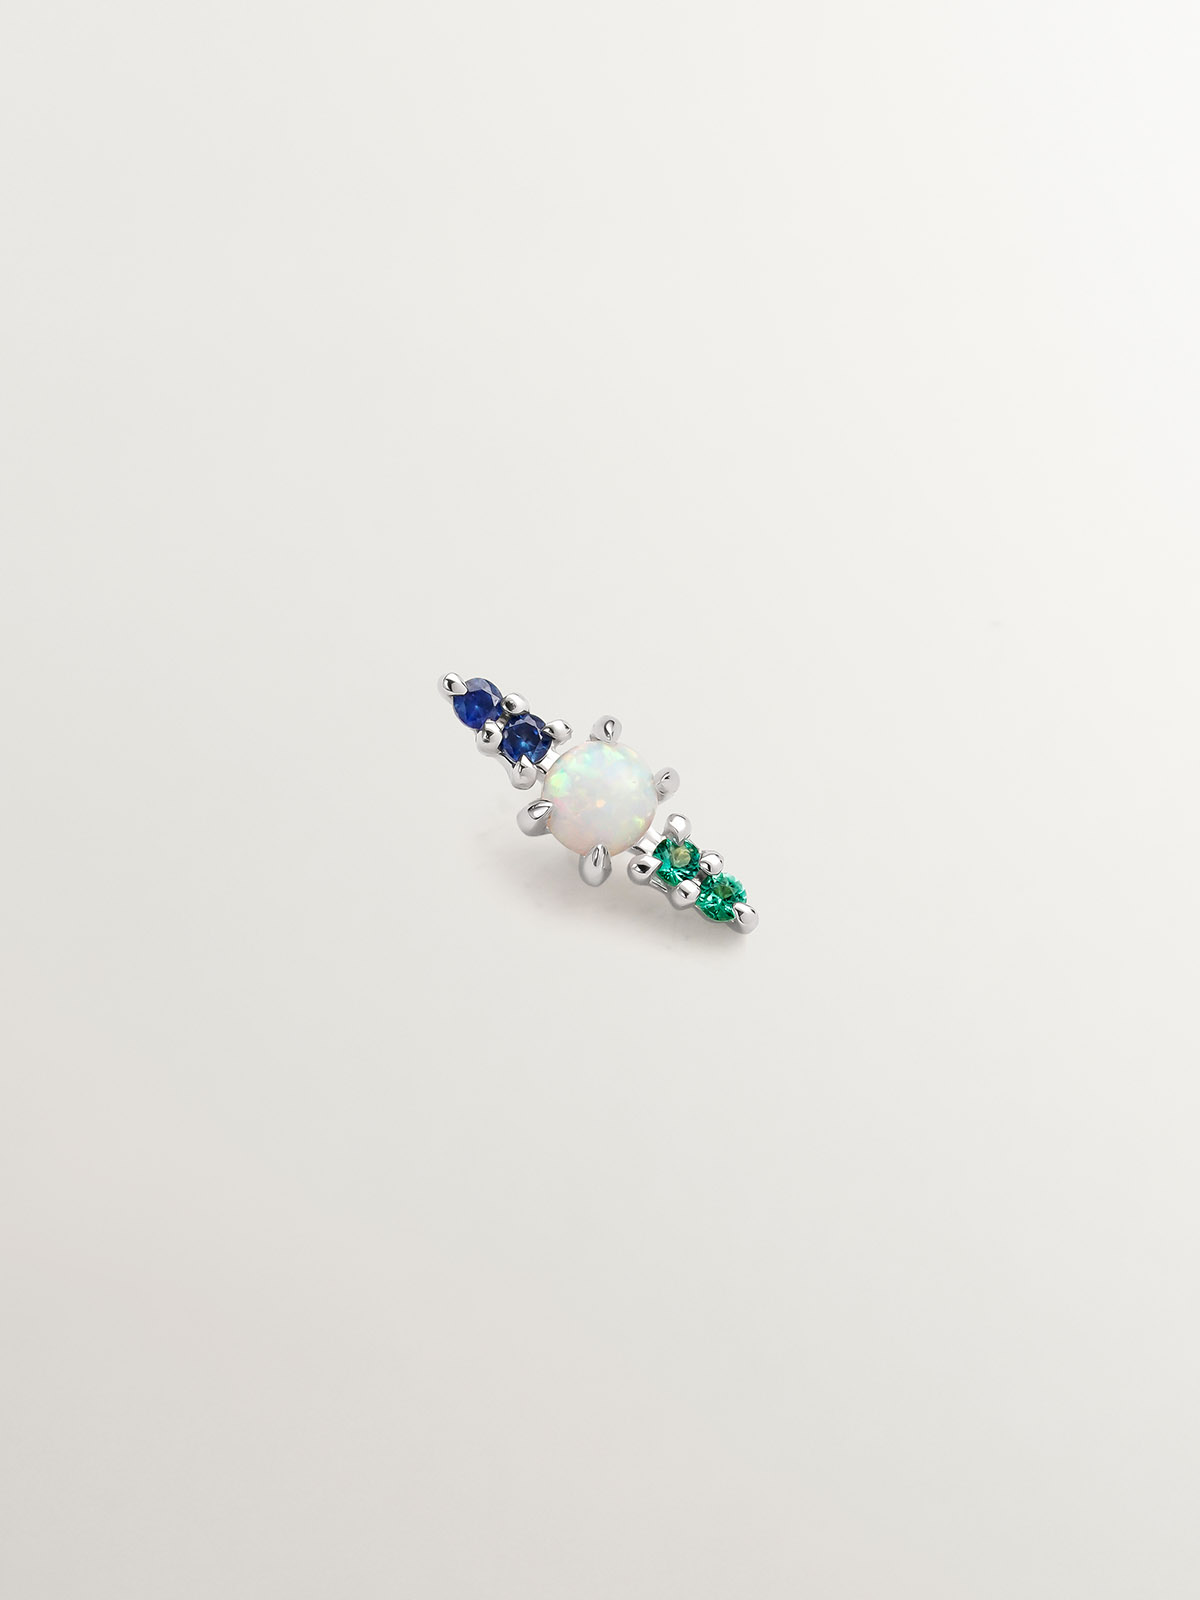 Individual 18K white gold earring with lab grown turquoise opal, blue sapphires and emeralds.